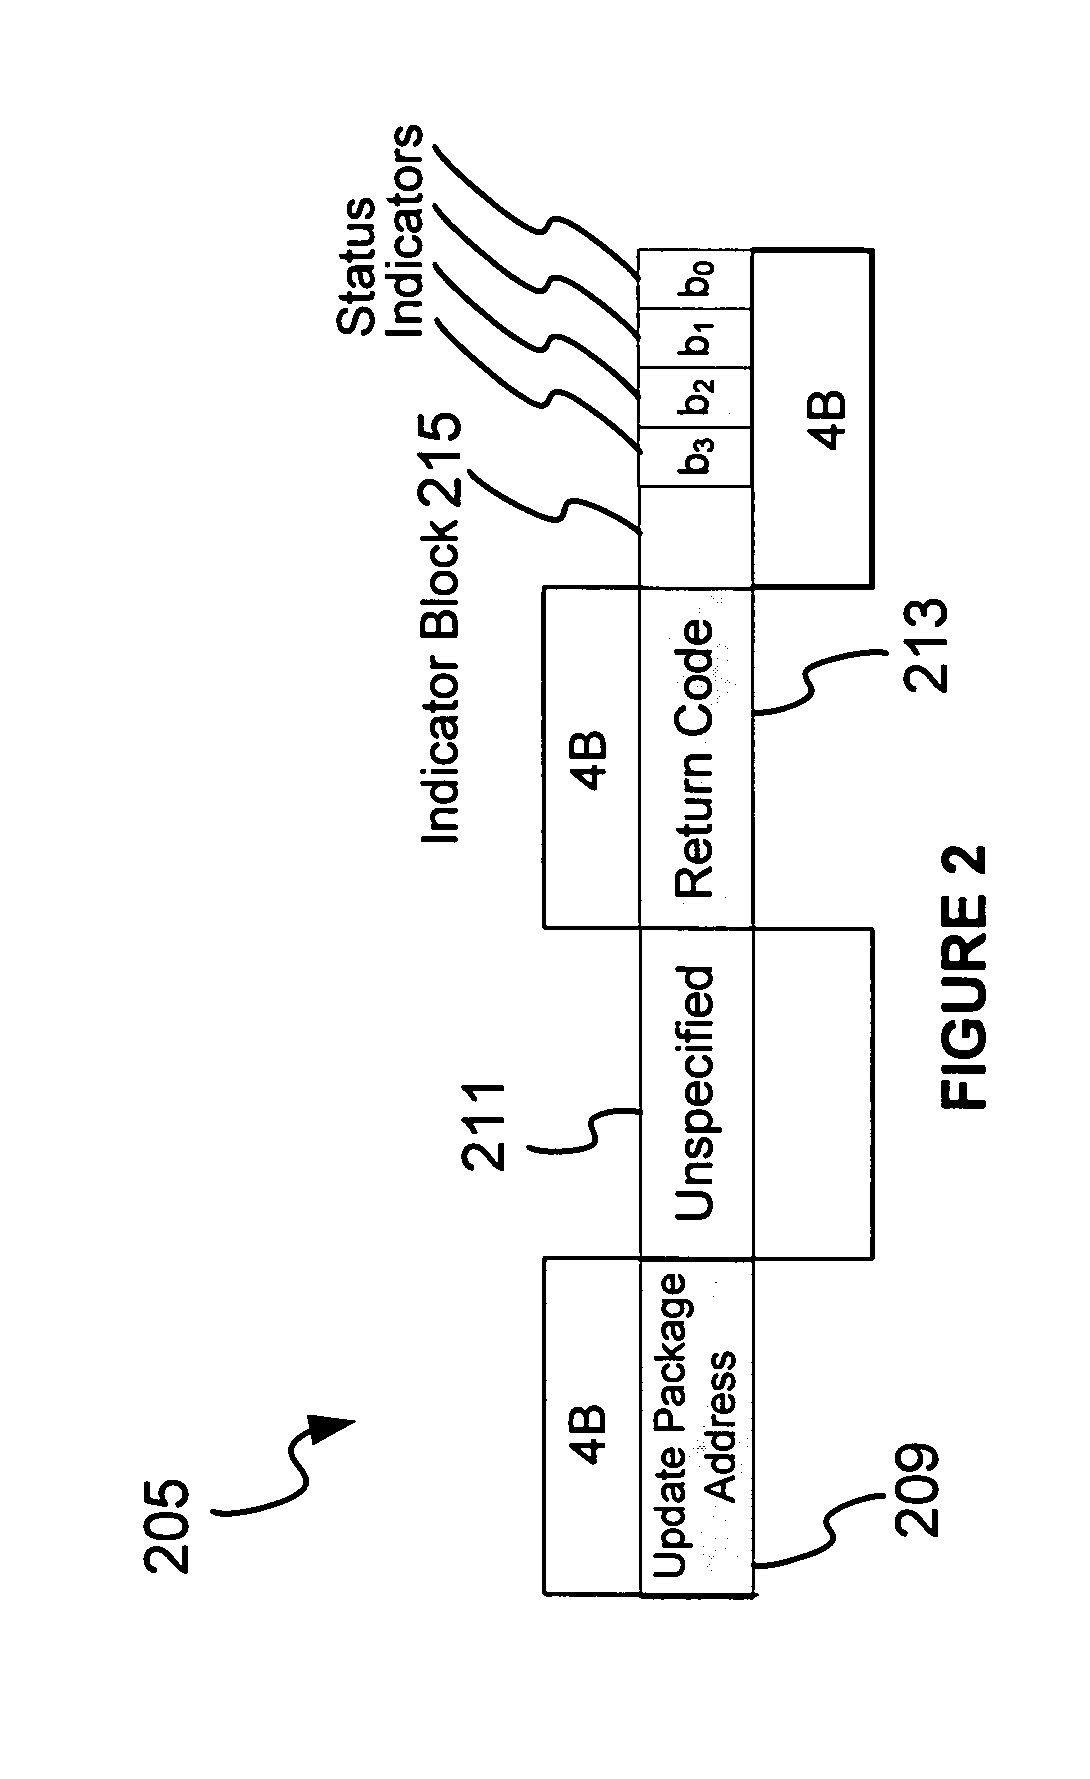 Tri-phase boot process in electronic devices